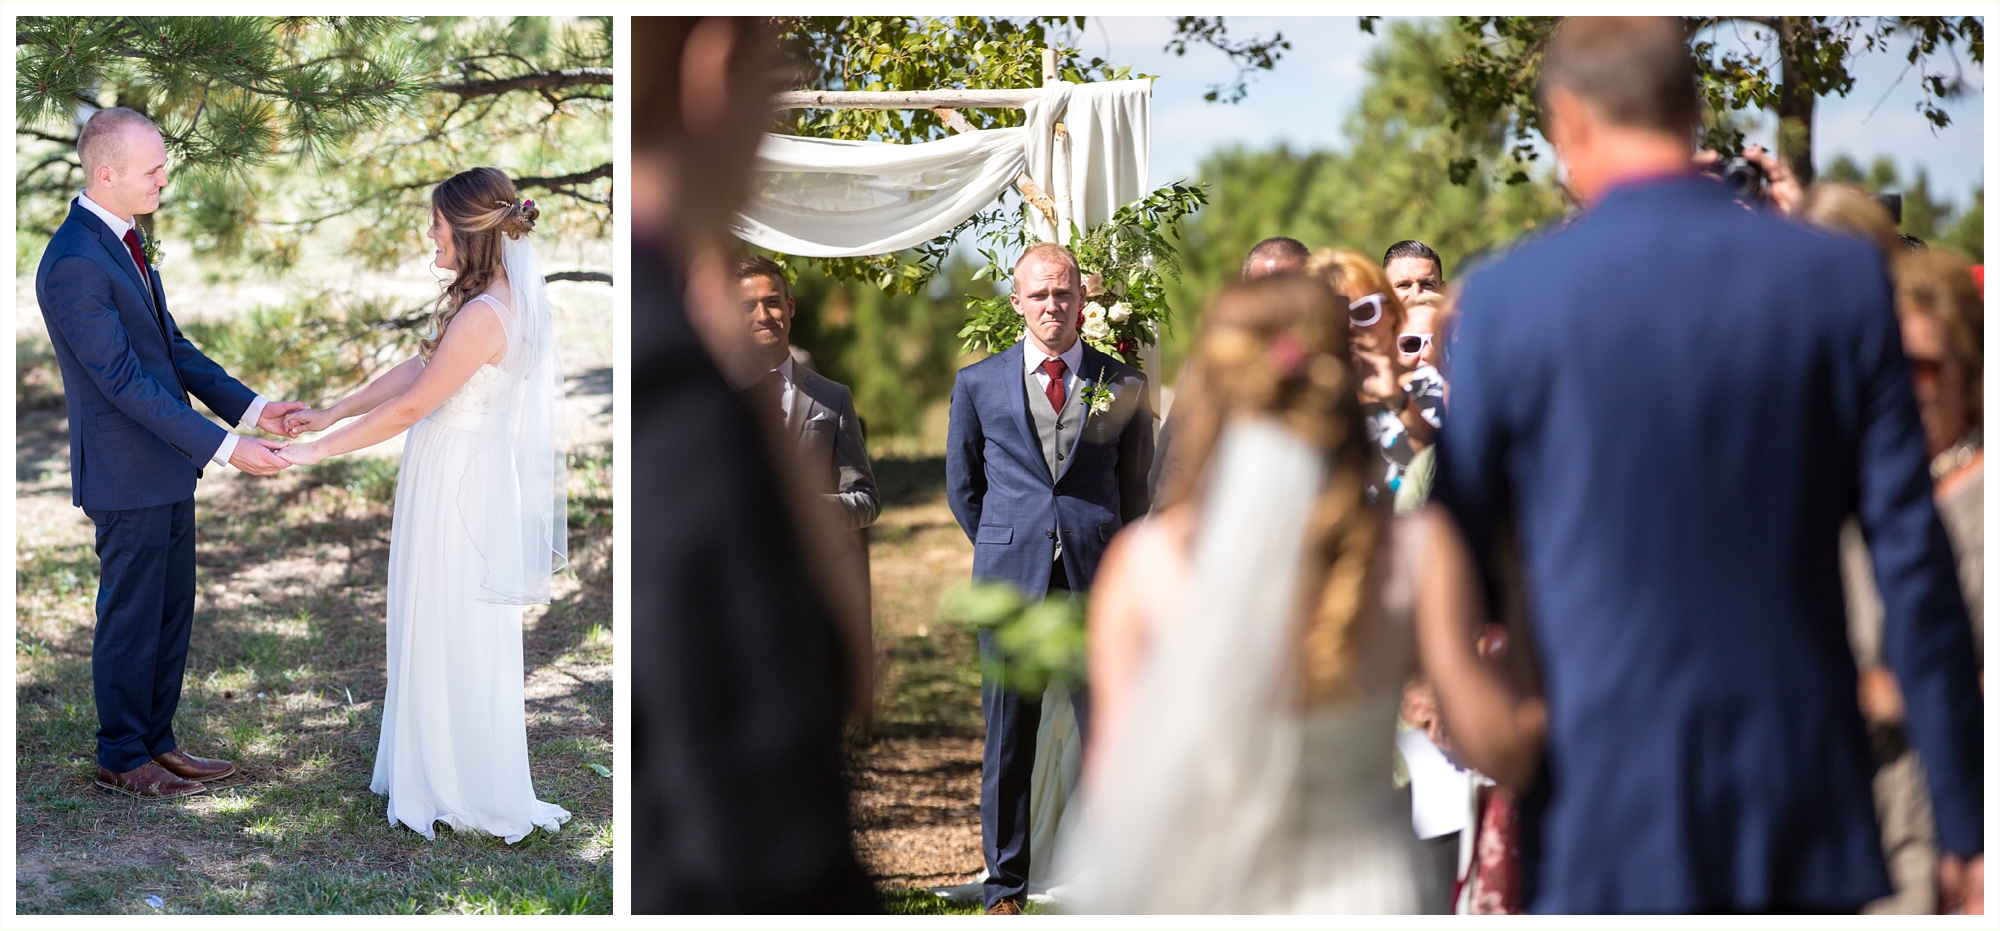 groom is emotional seeing his bride walk down the aisle even thought they did a first look